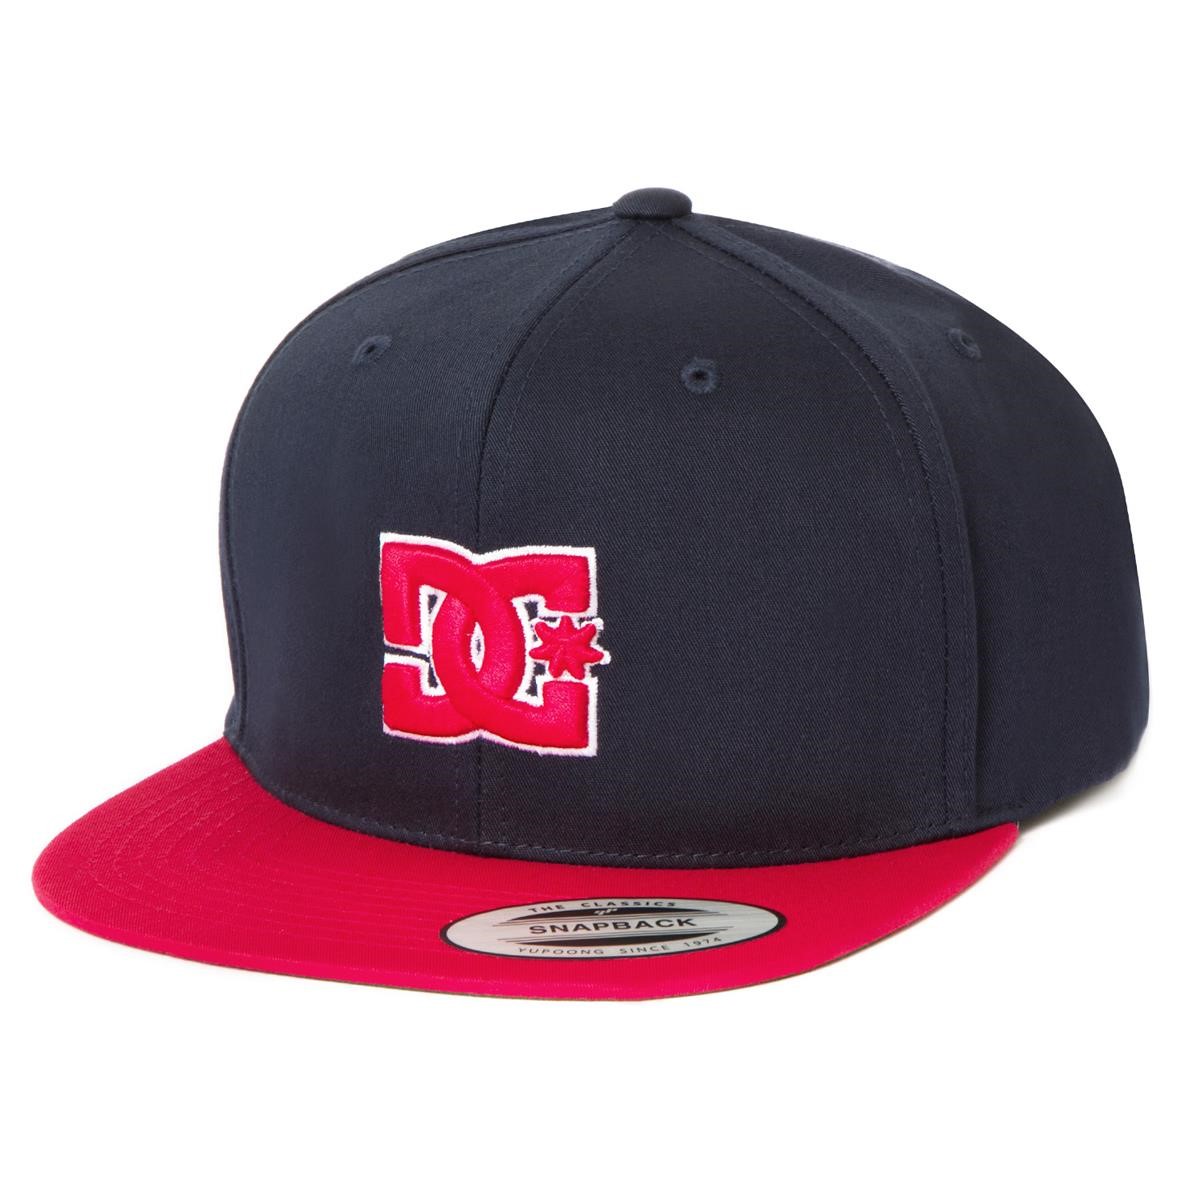 DC Snappy DC Navy/Red